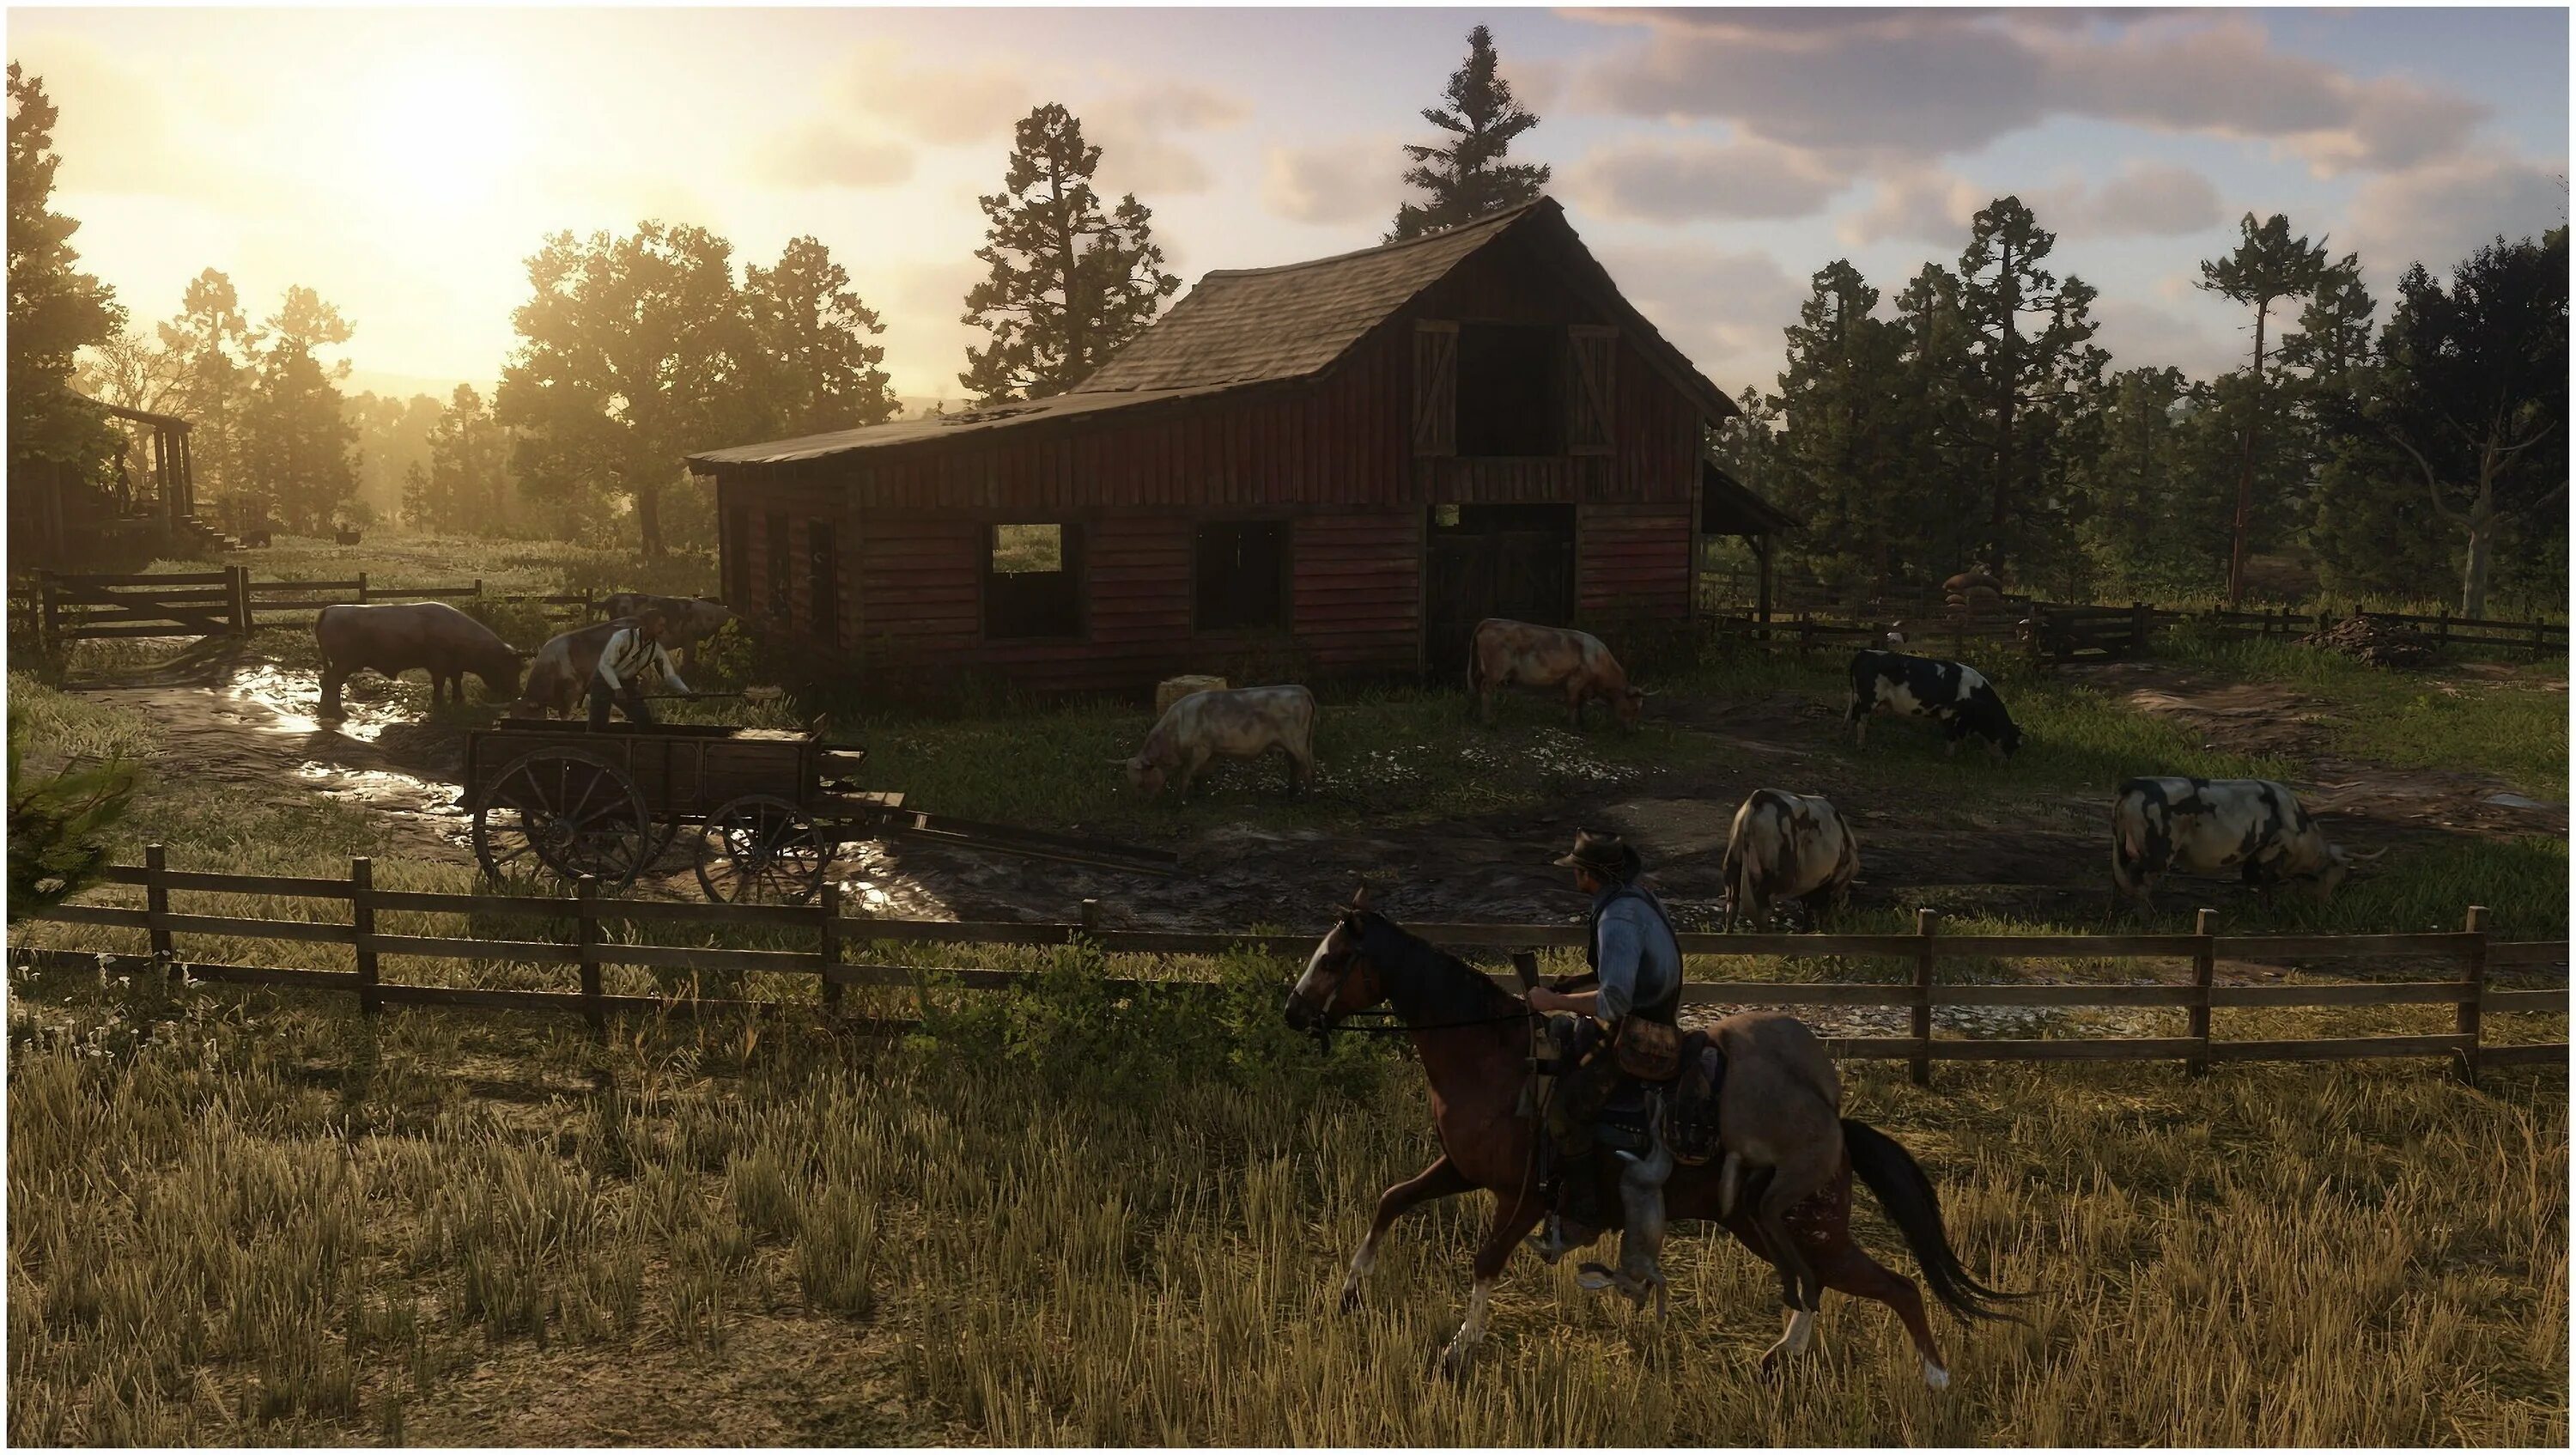 Red redemption 2 купить ps4. Red Dead Redemption 2. Игра ред деад редемптион 2. Rdr 2 ps4. Xbox one Red Dead Redemption 2.